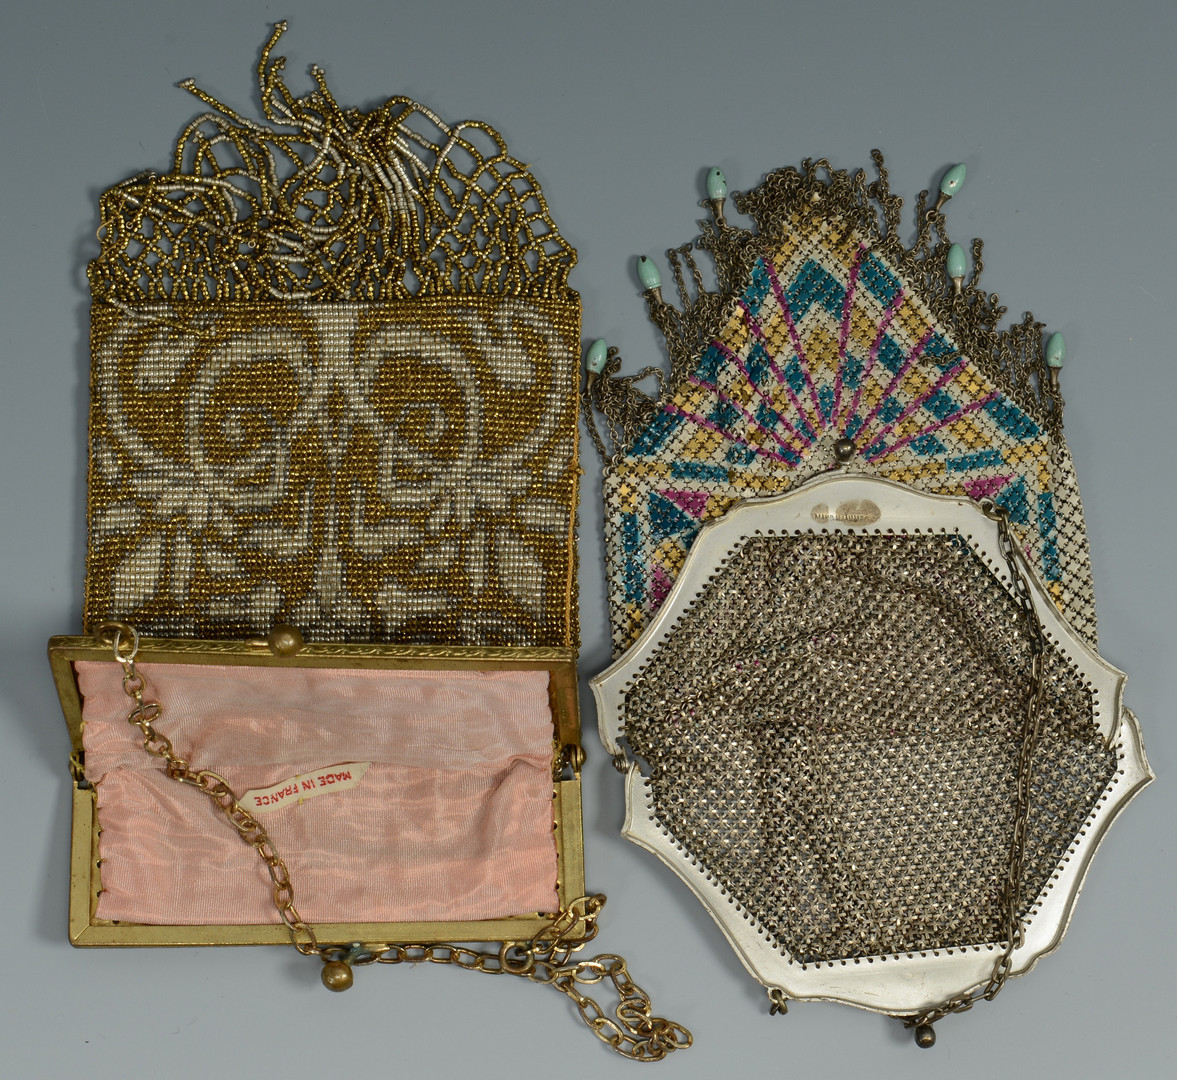 Lot 823: Grouping of 5 Ladies Purses